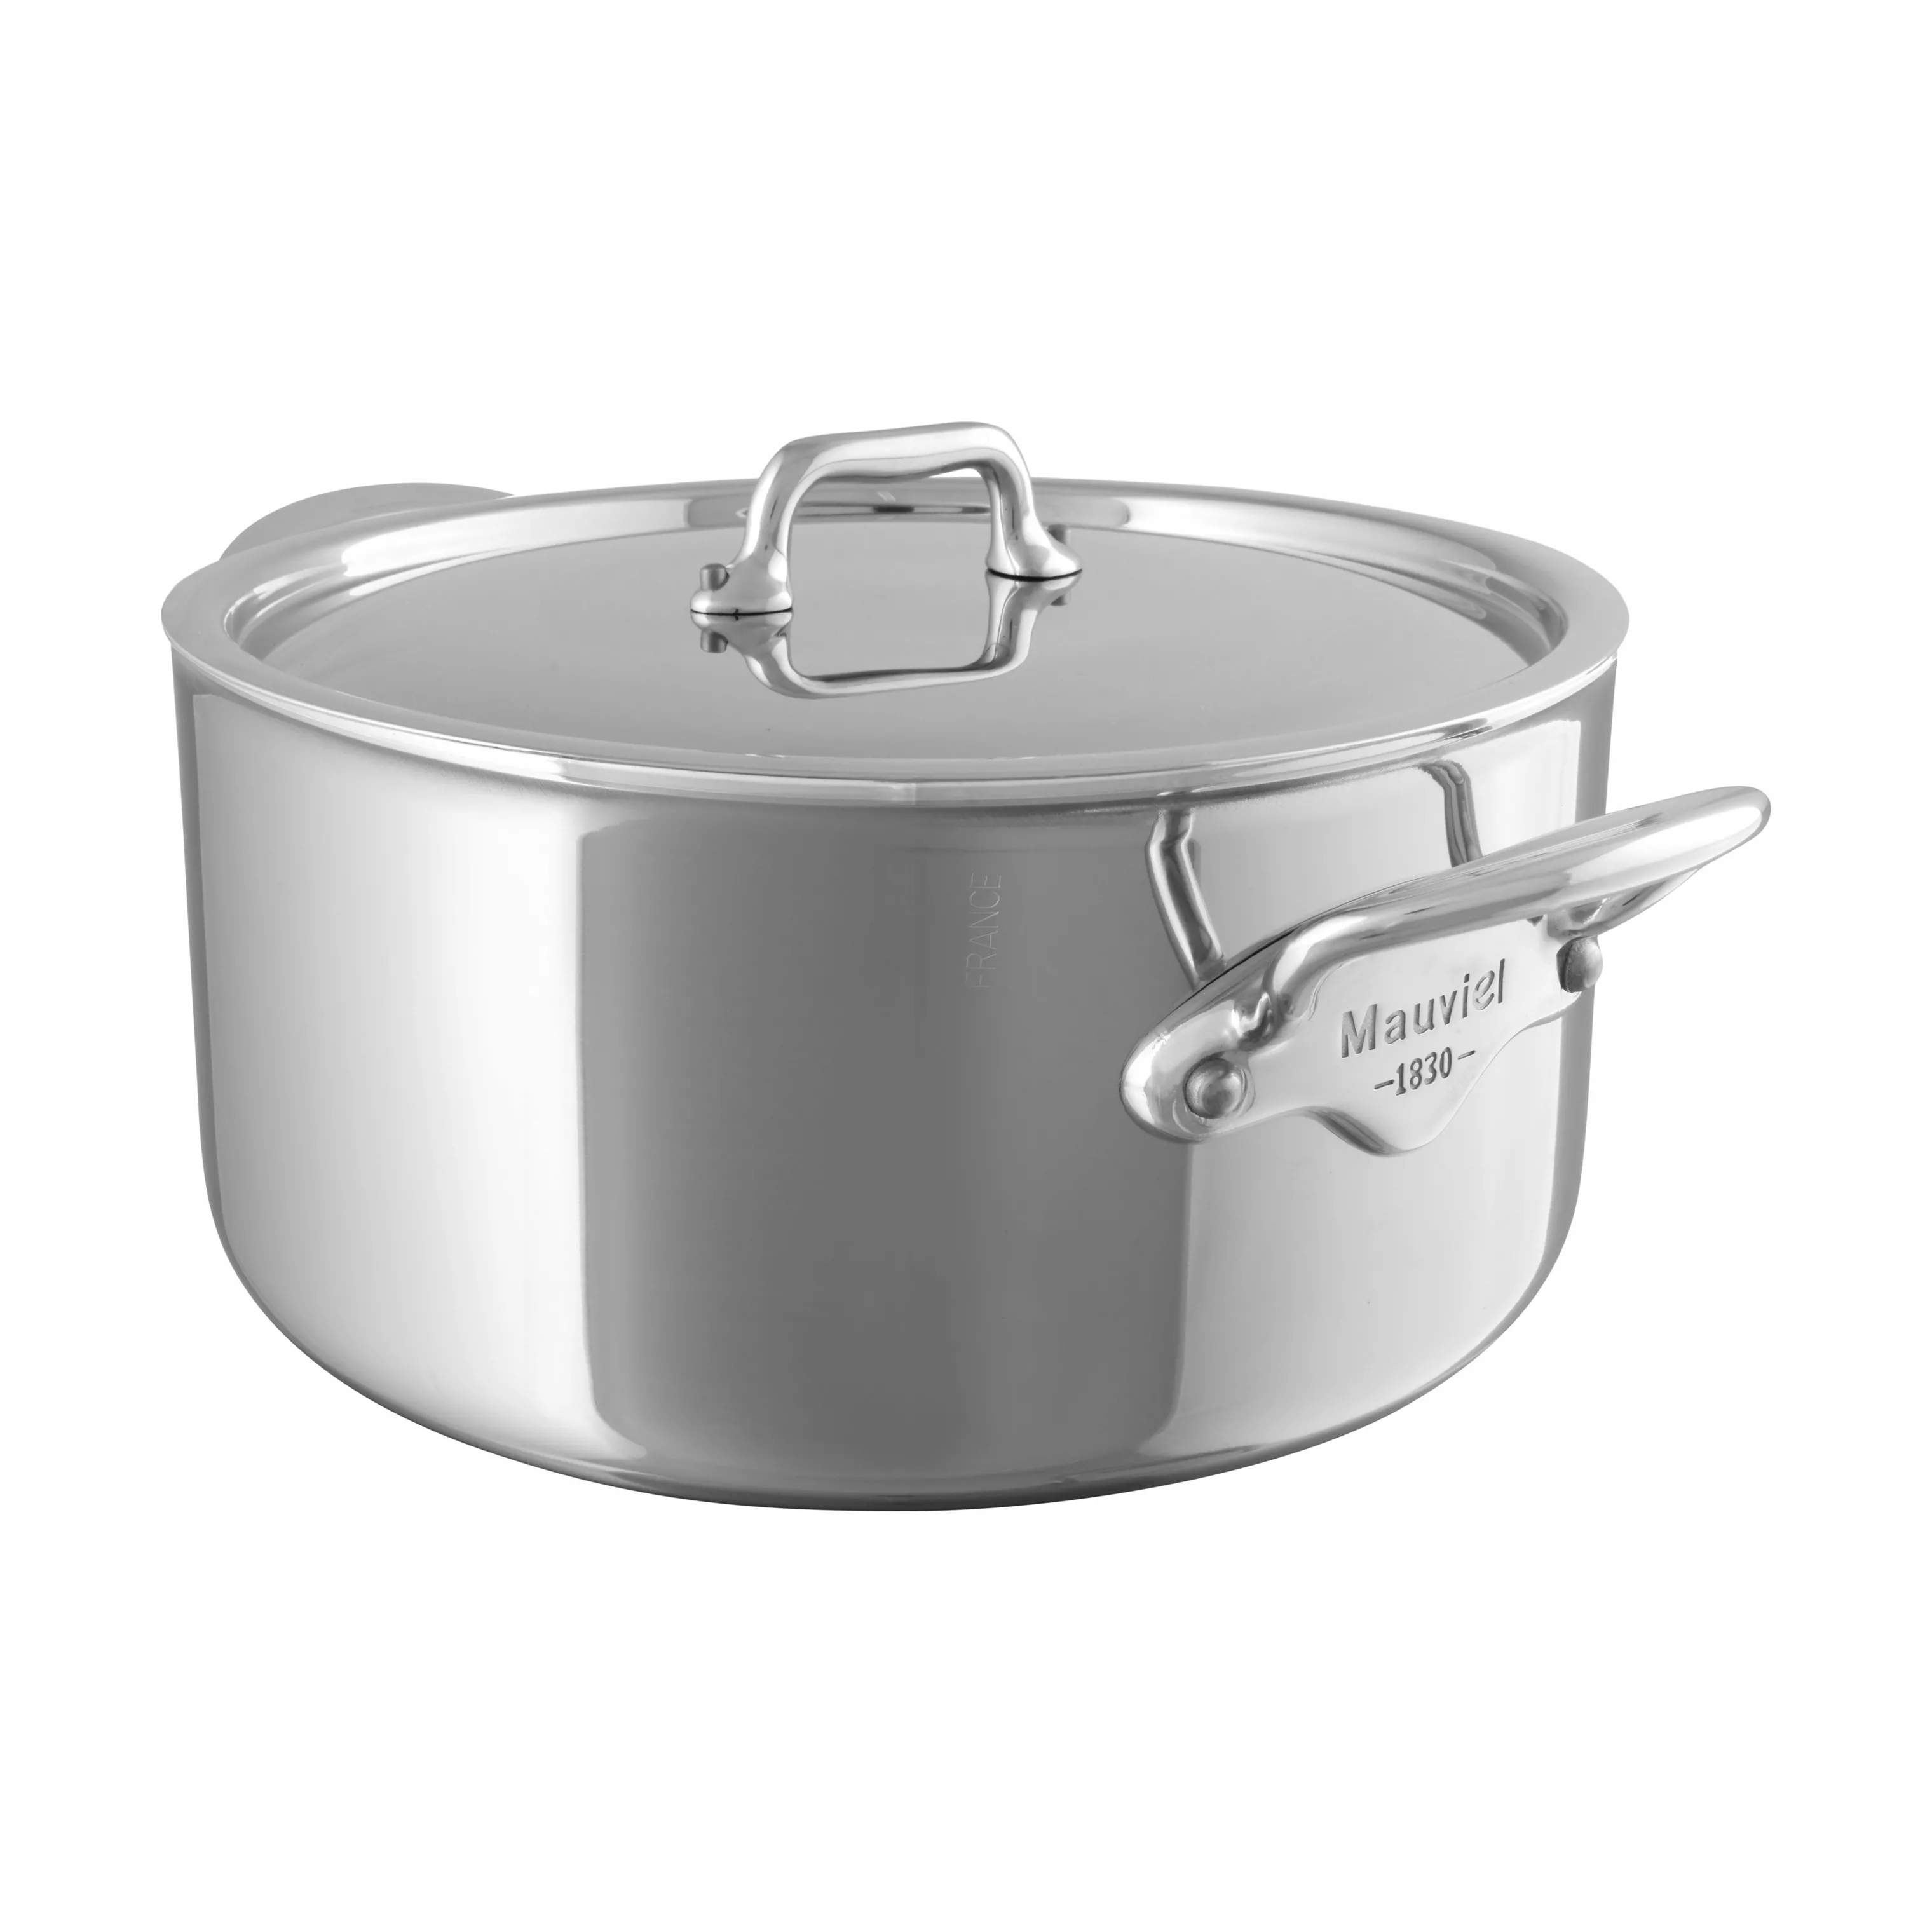 Cook Style Gryde, metal, large